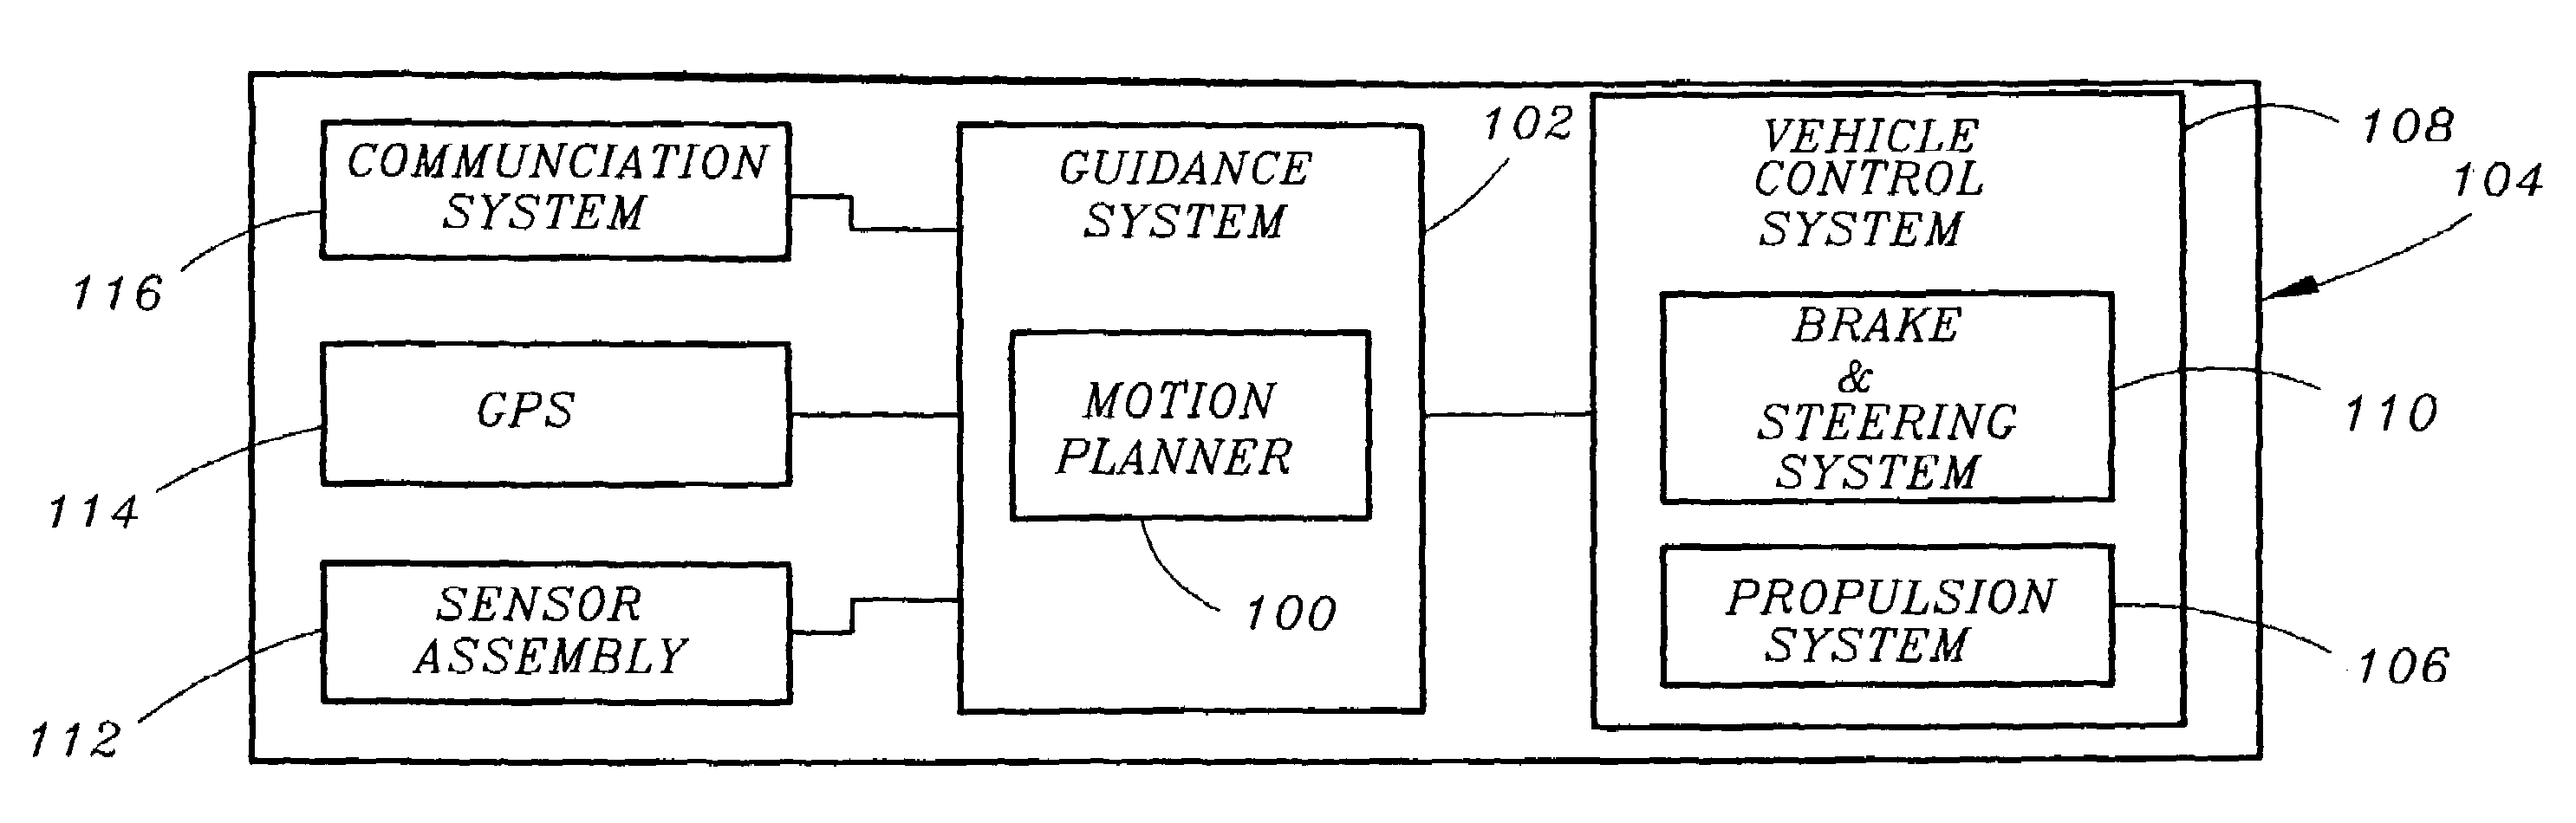 Motion planner for unmanned ground vehicles traversing at high speeds in partially known environments